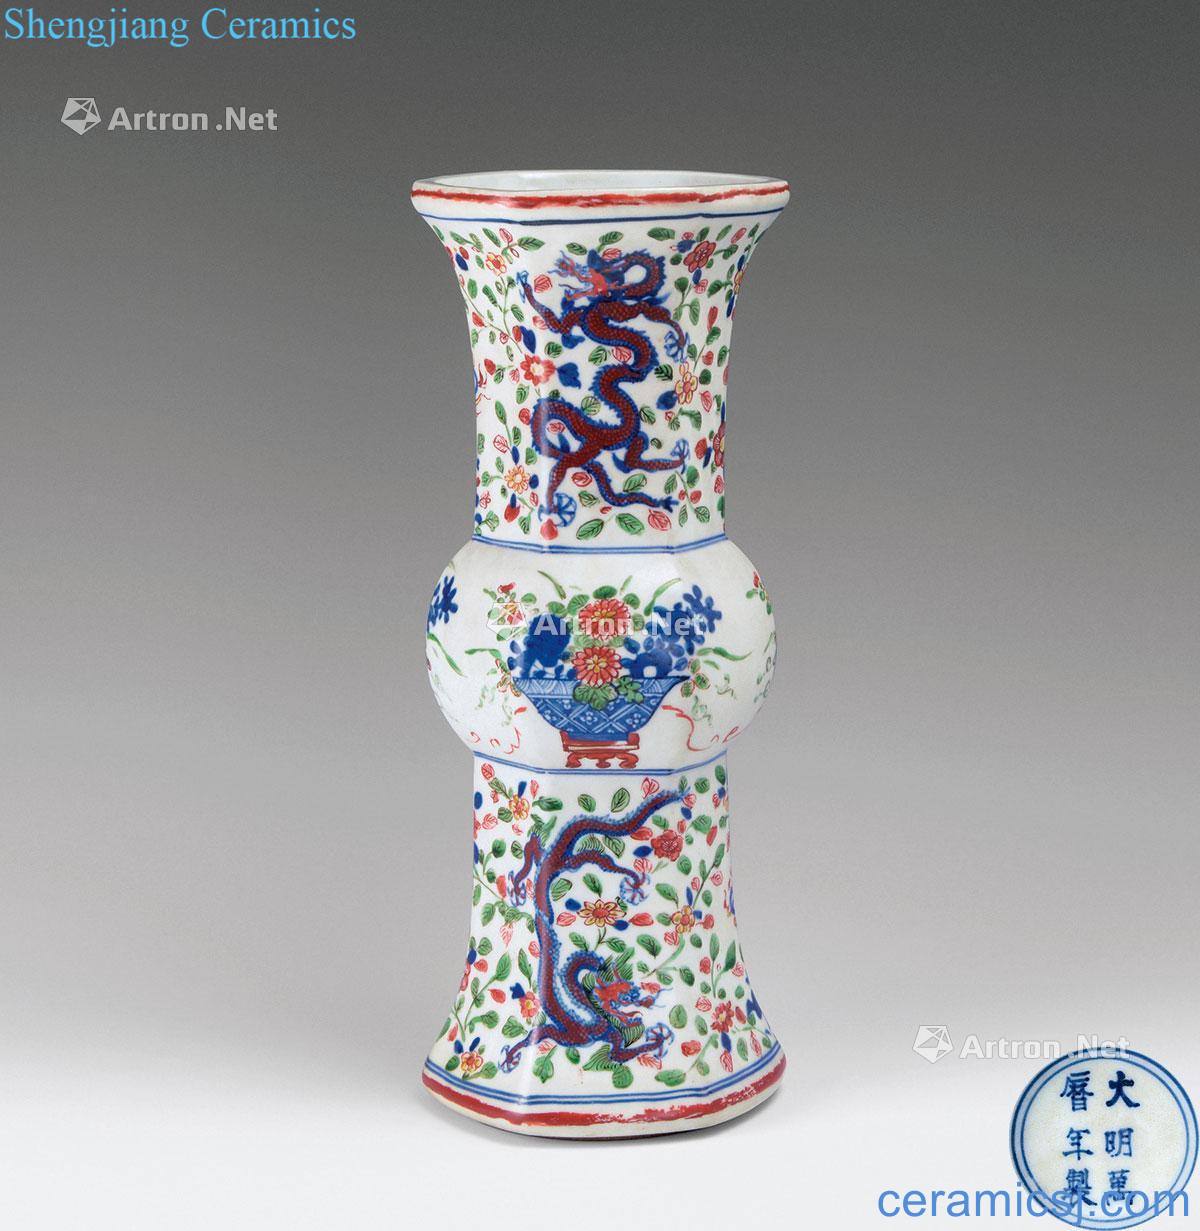 In the Ming dynasty Colorful dragon flower vase with flowers